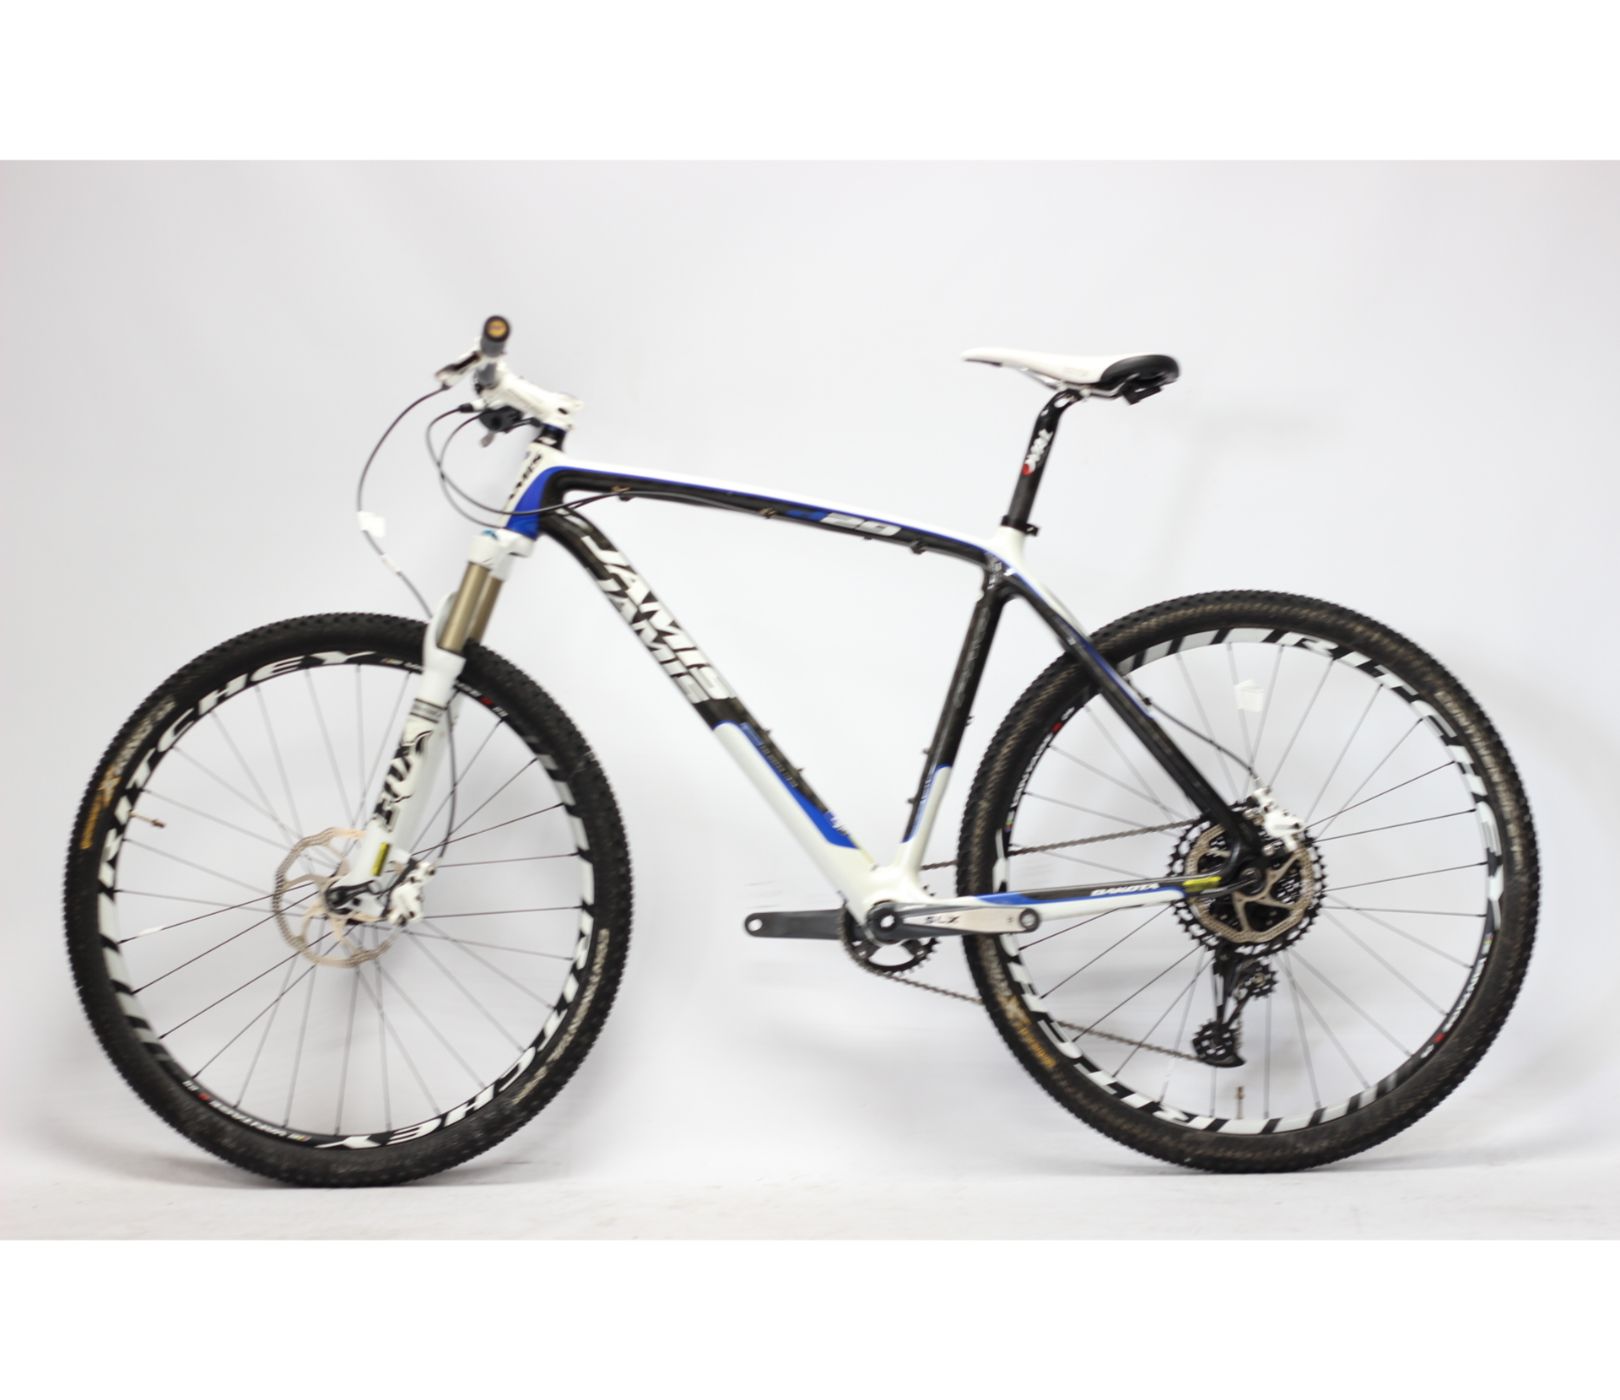 Pre-Owned Jamis Pro Carbon Hardtail Mountain Bike - L